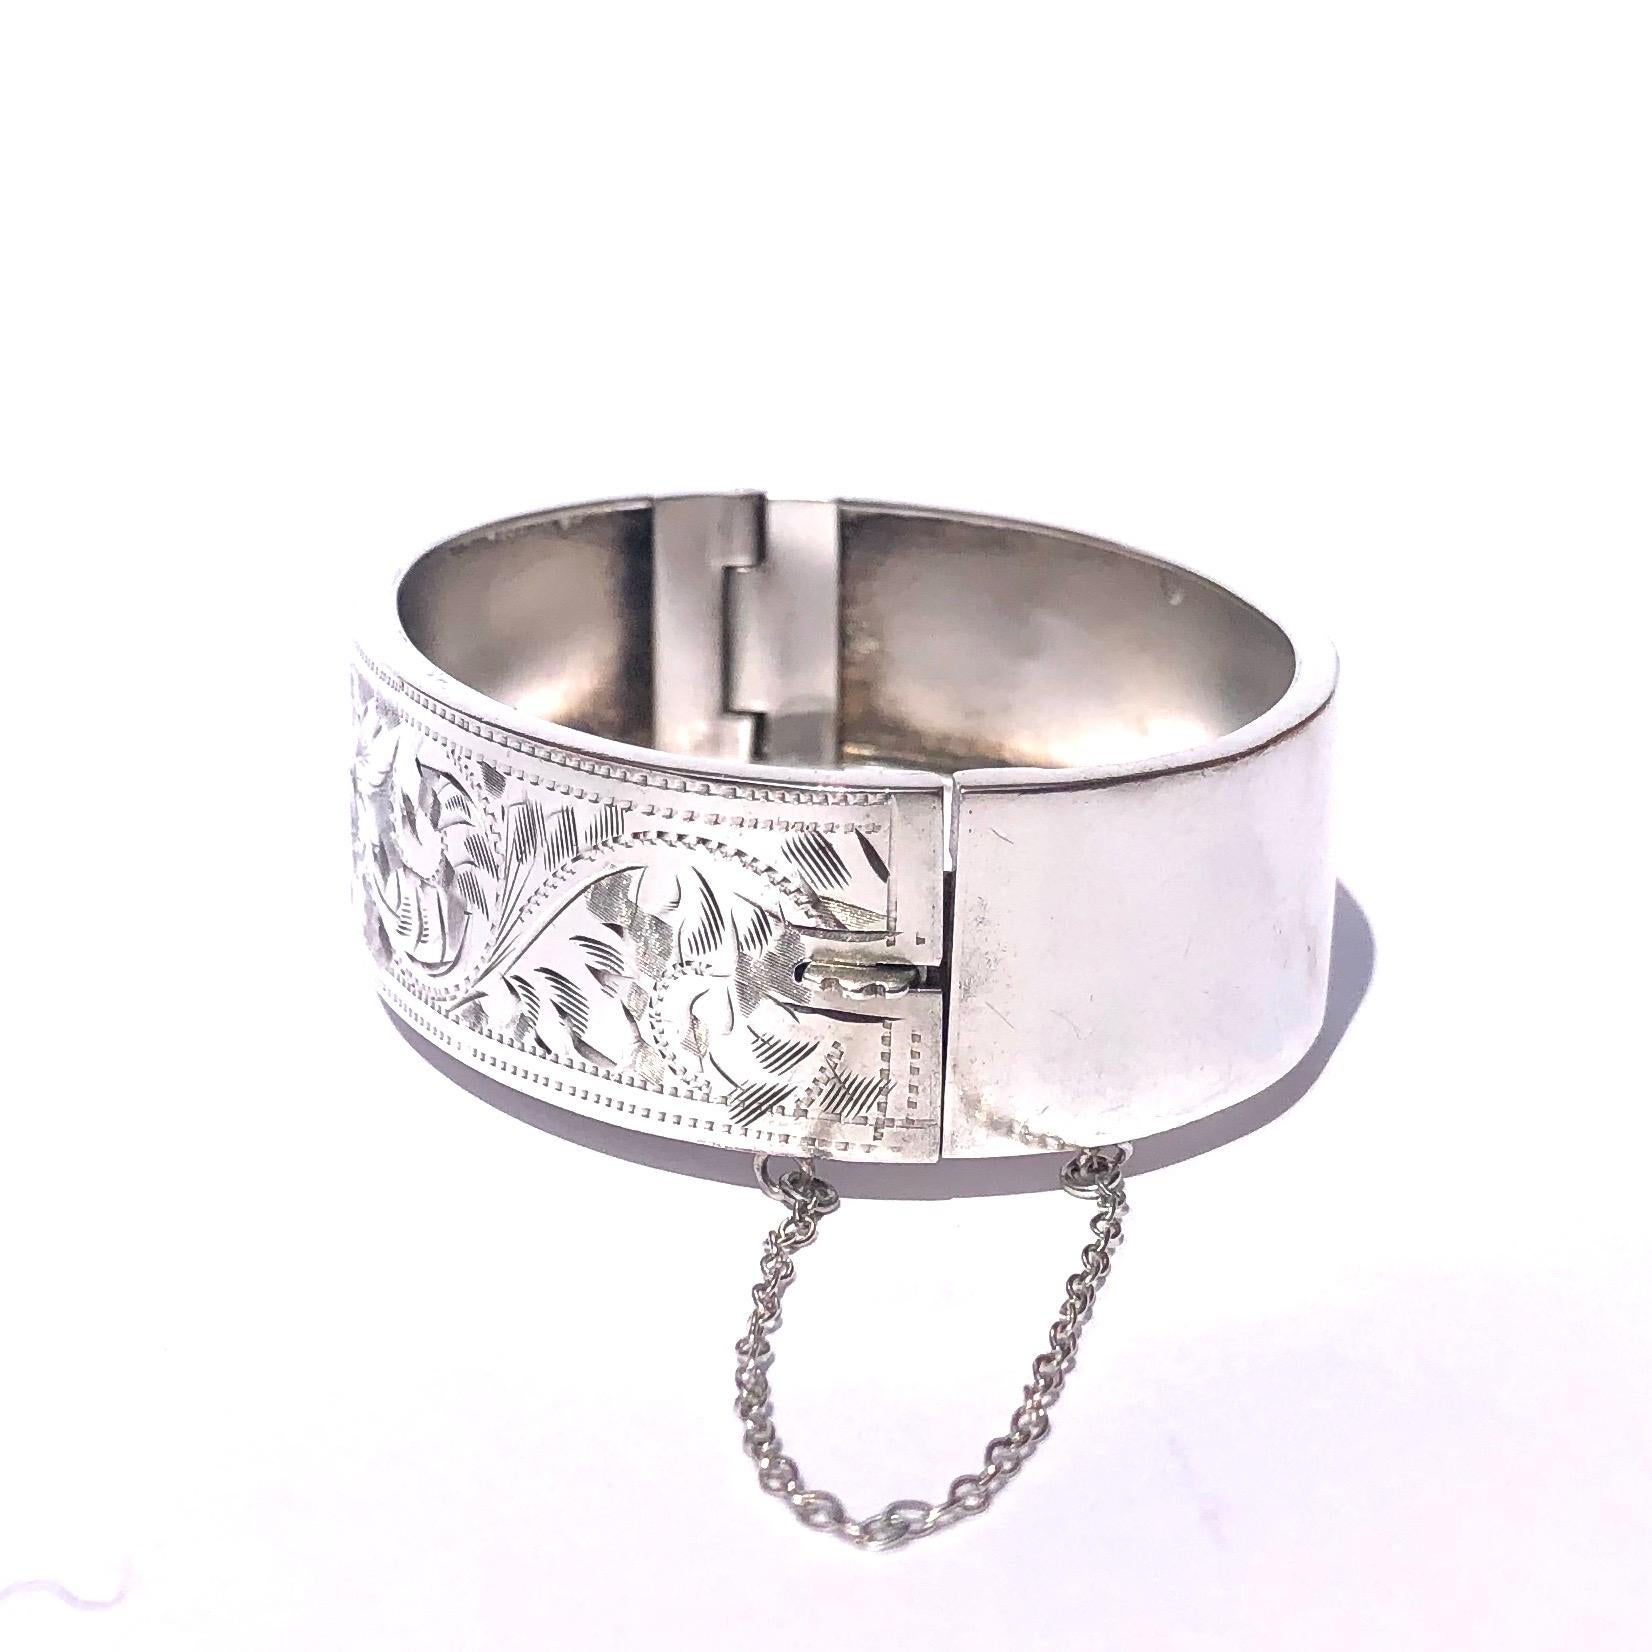 This silver bangle has a delicate feel to it and the engraving is absolutely exquisite. The design of the engraving is made up sweet flowers and leaf detail. 

Inner Diameter: 64mm
Bangle Width: 19mm

Weight: 23.9g